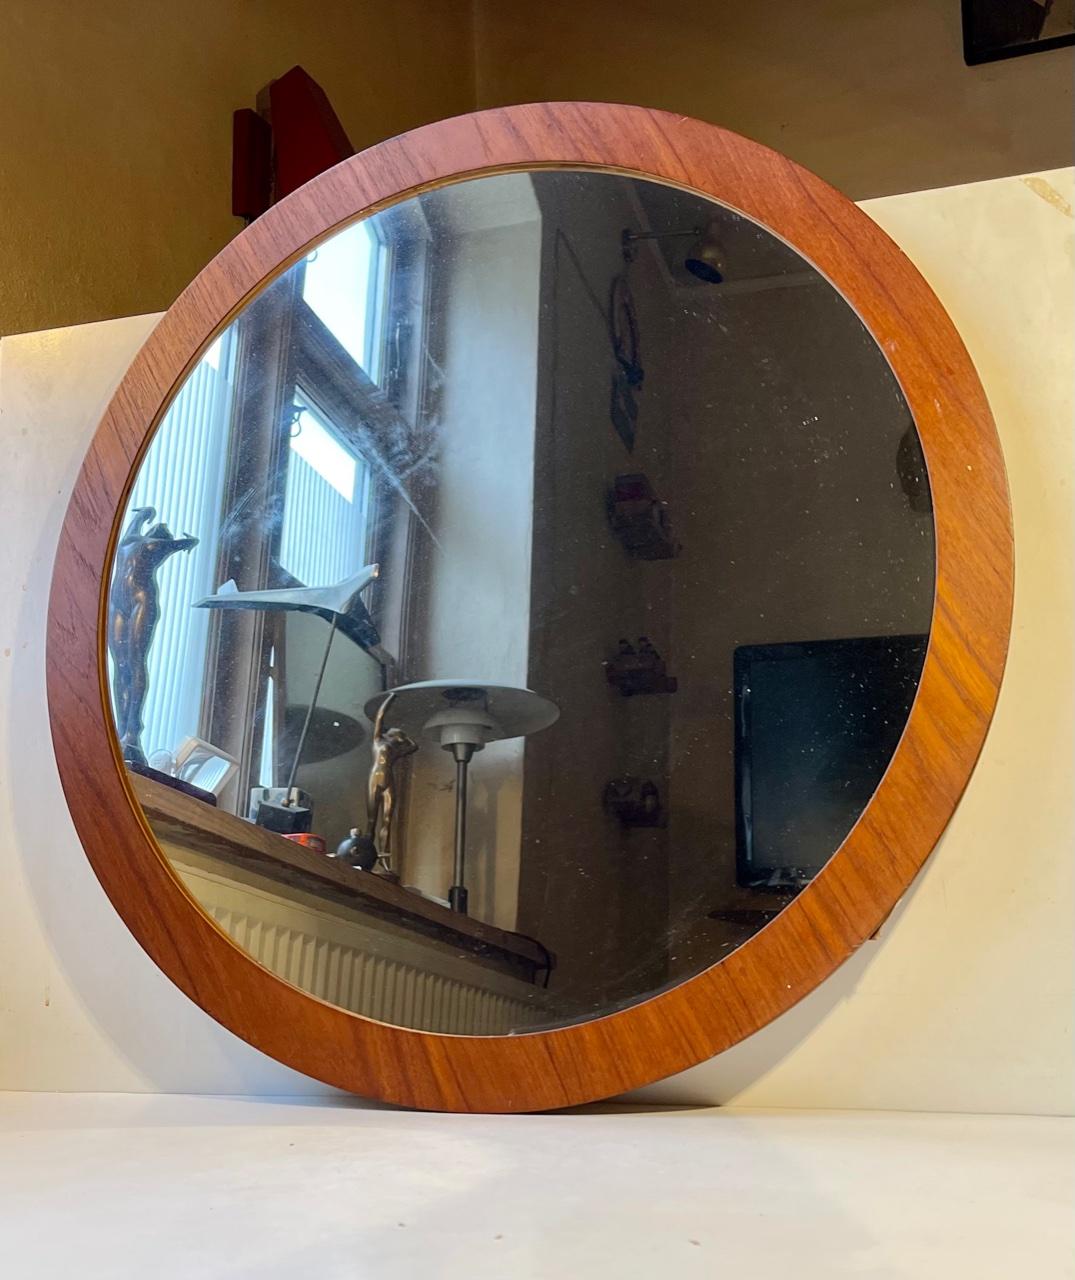 A large (60 cm) - 24 inches) circular wall-mounted mirror in teak. Probably made by either Sika Moebler or Petersen Spejle in Denmark during the 1960s. It has a very clean look to it due very shallow dept of only 1 cm - 0.4 inch.